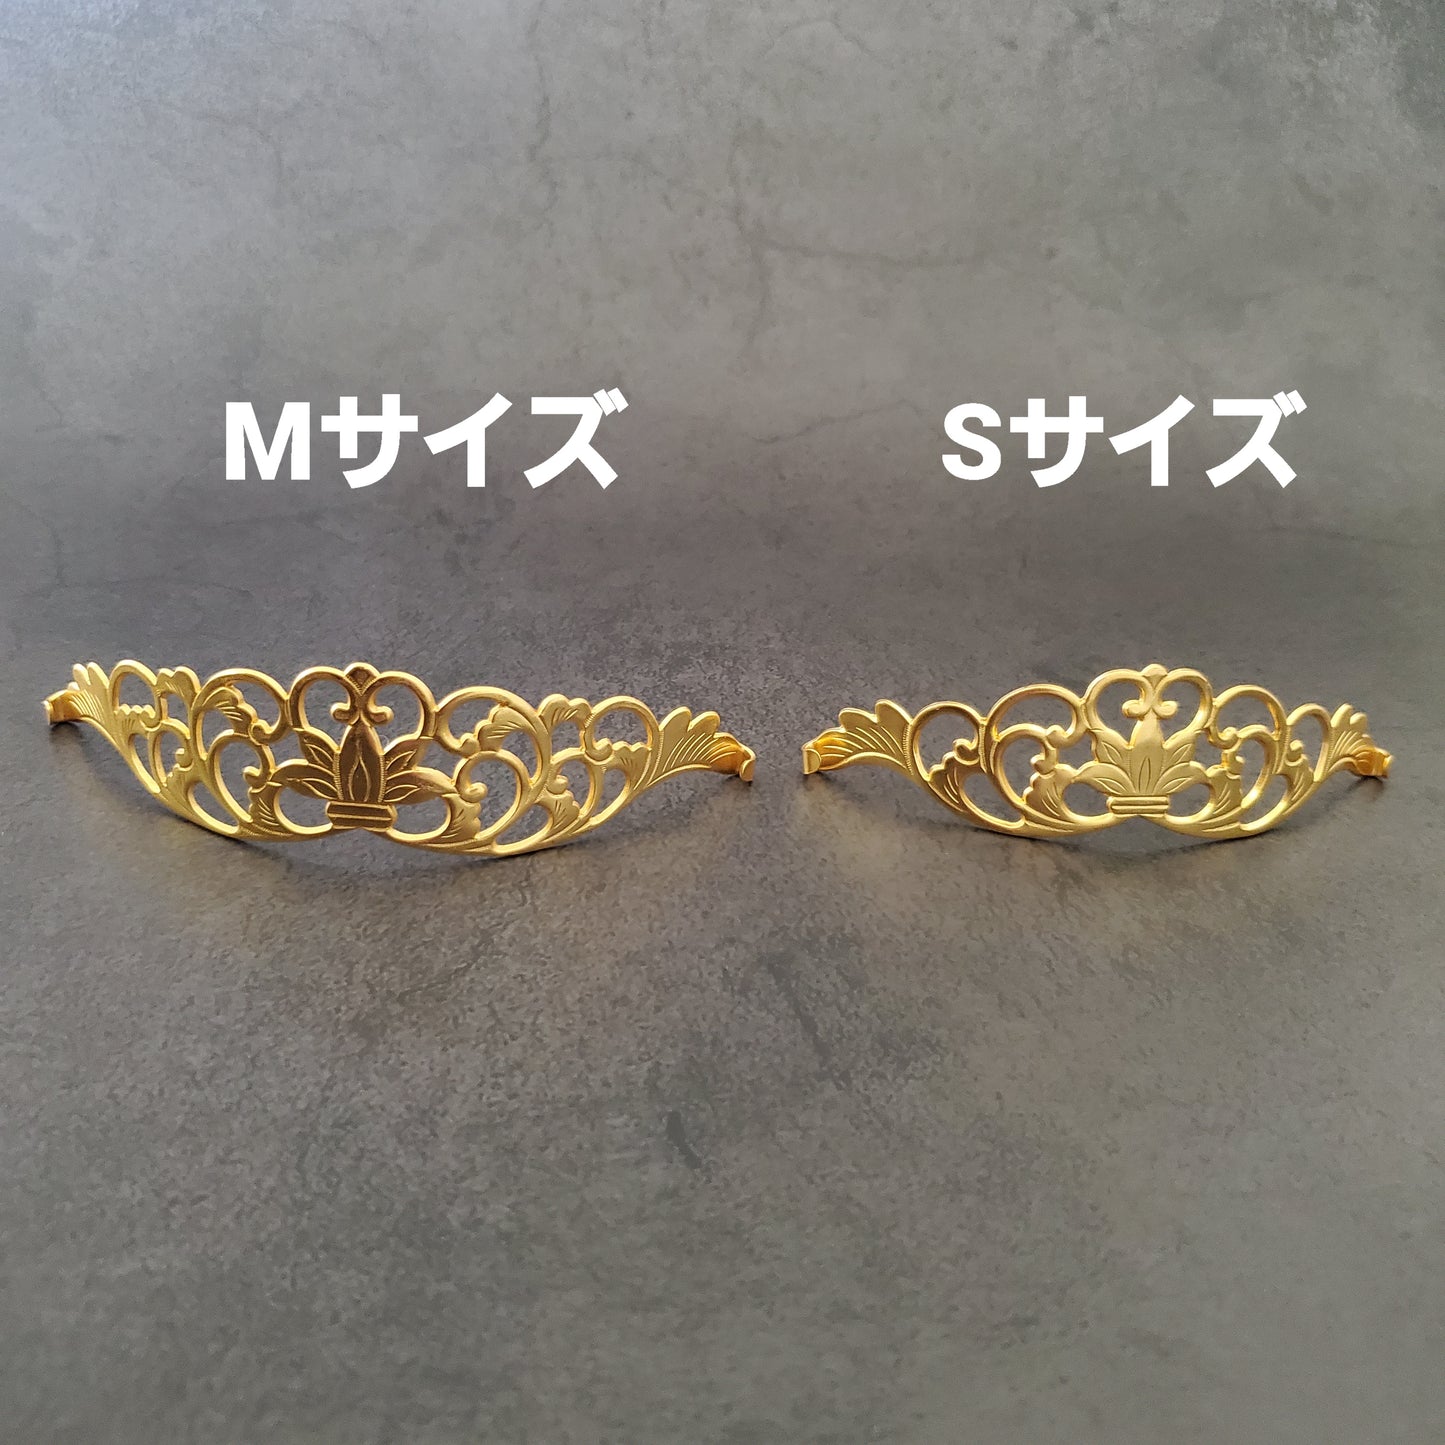 Mask band gold-plated (size M/S)